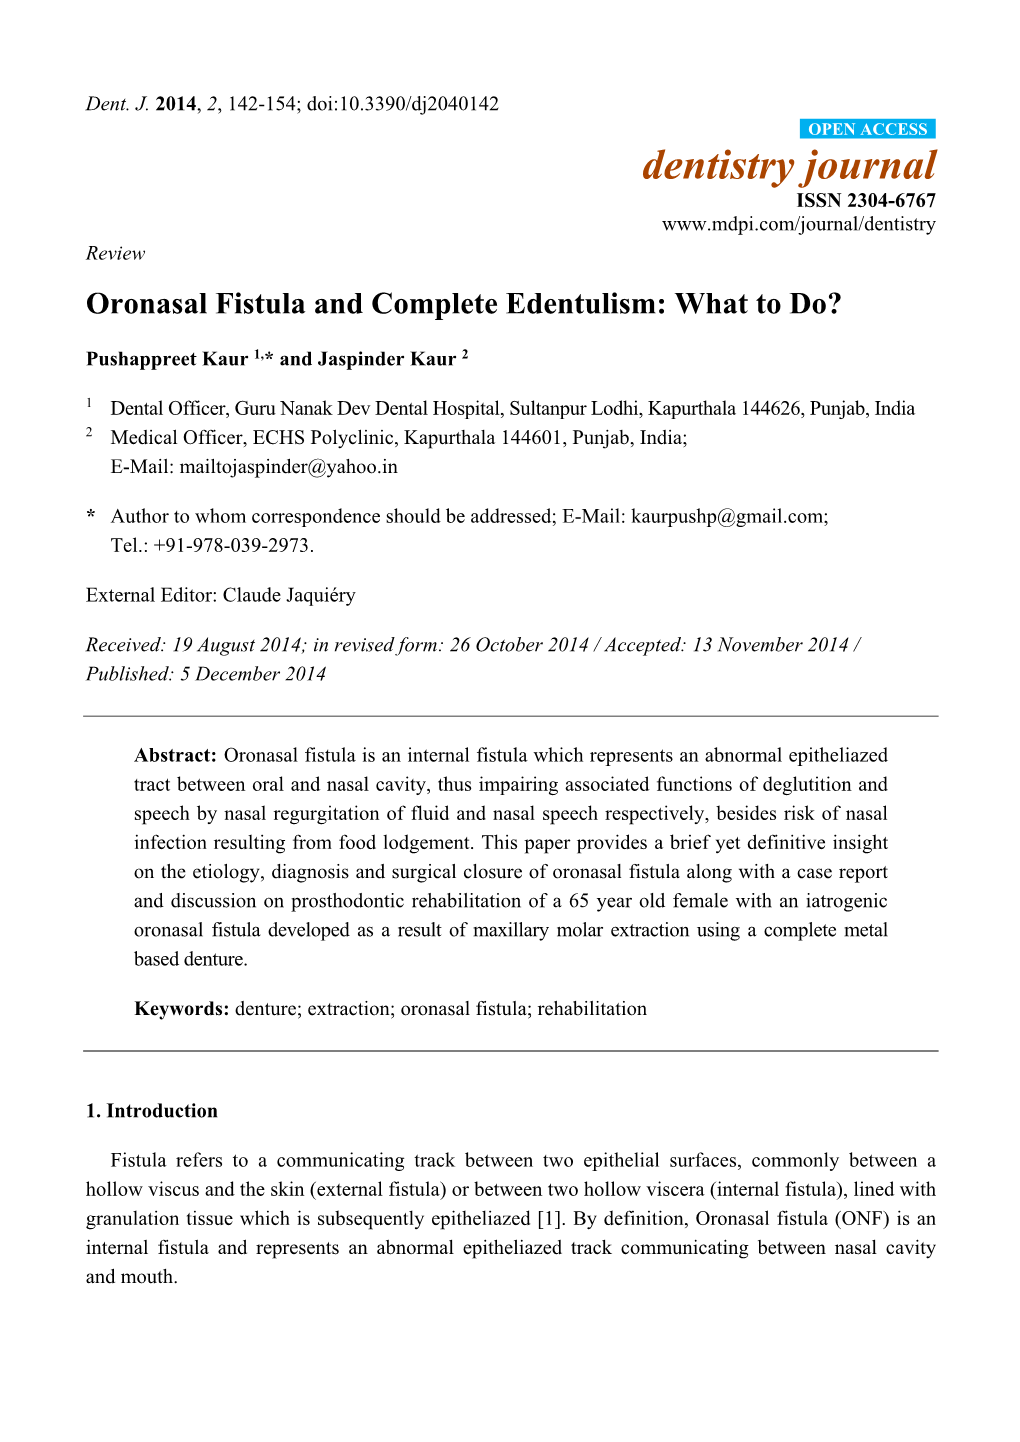 Oronasal Fistula and Complete Edentulism: What to Do?